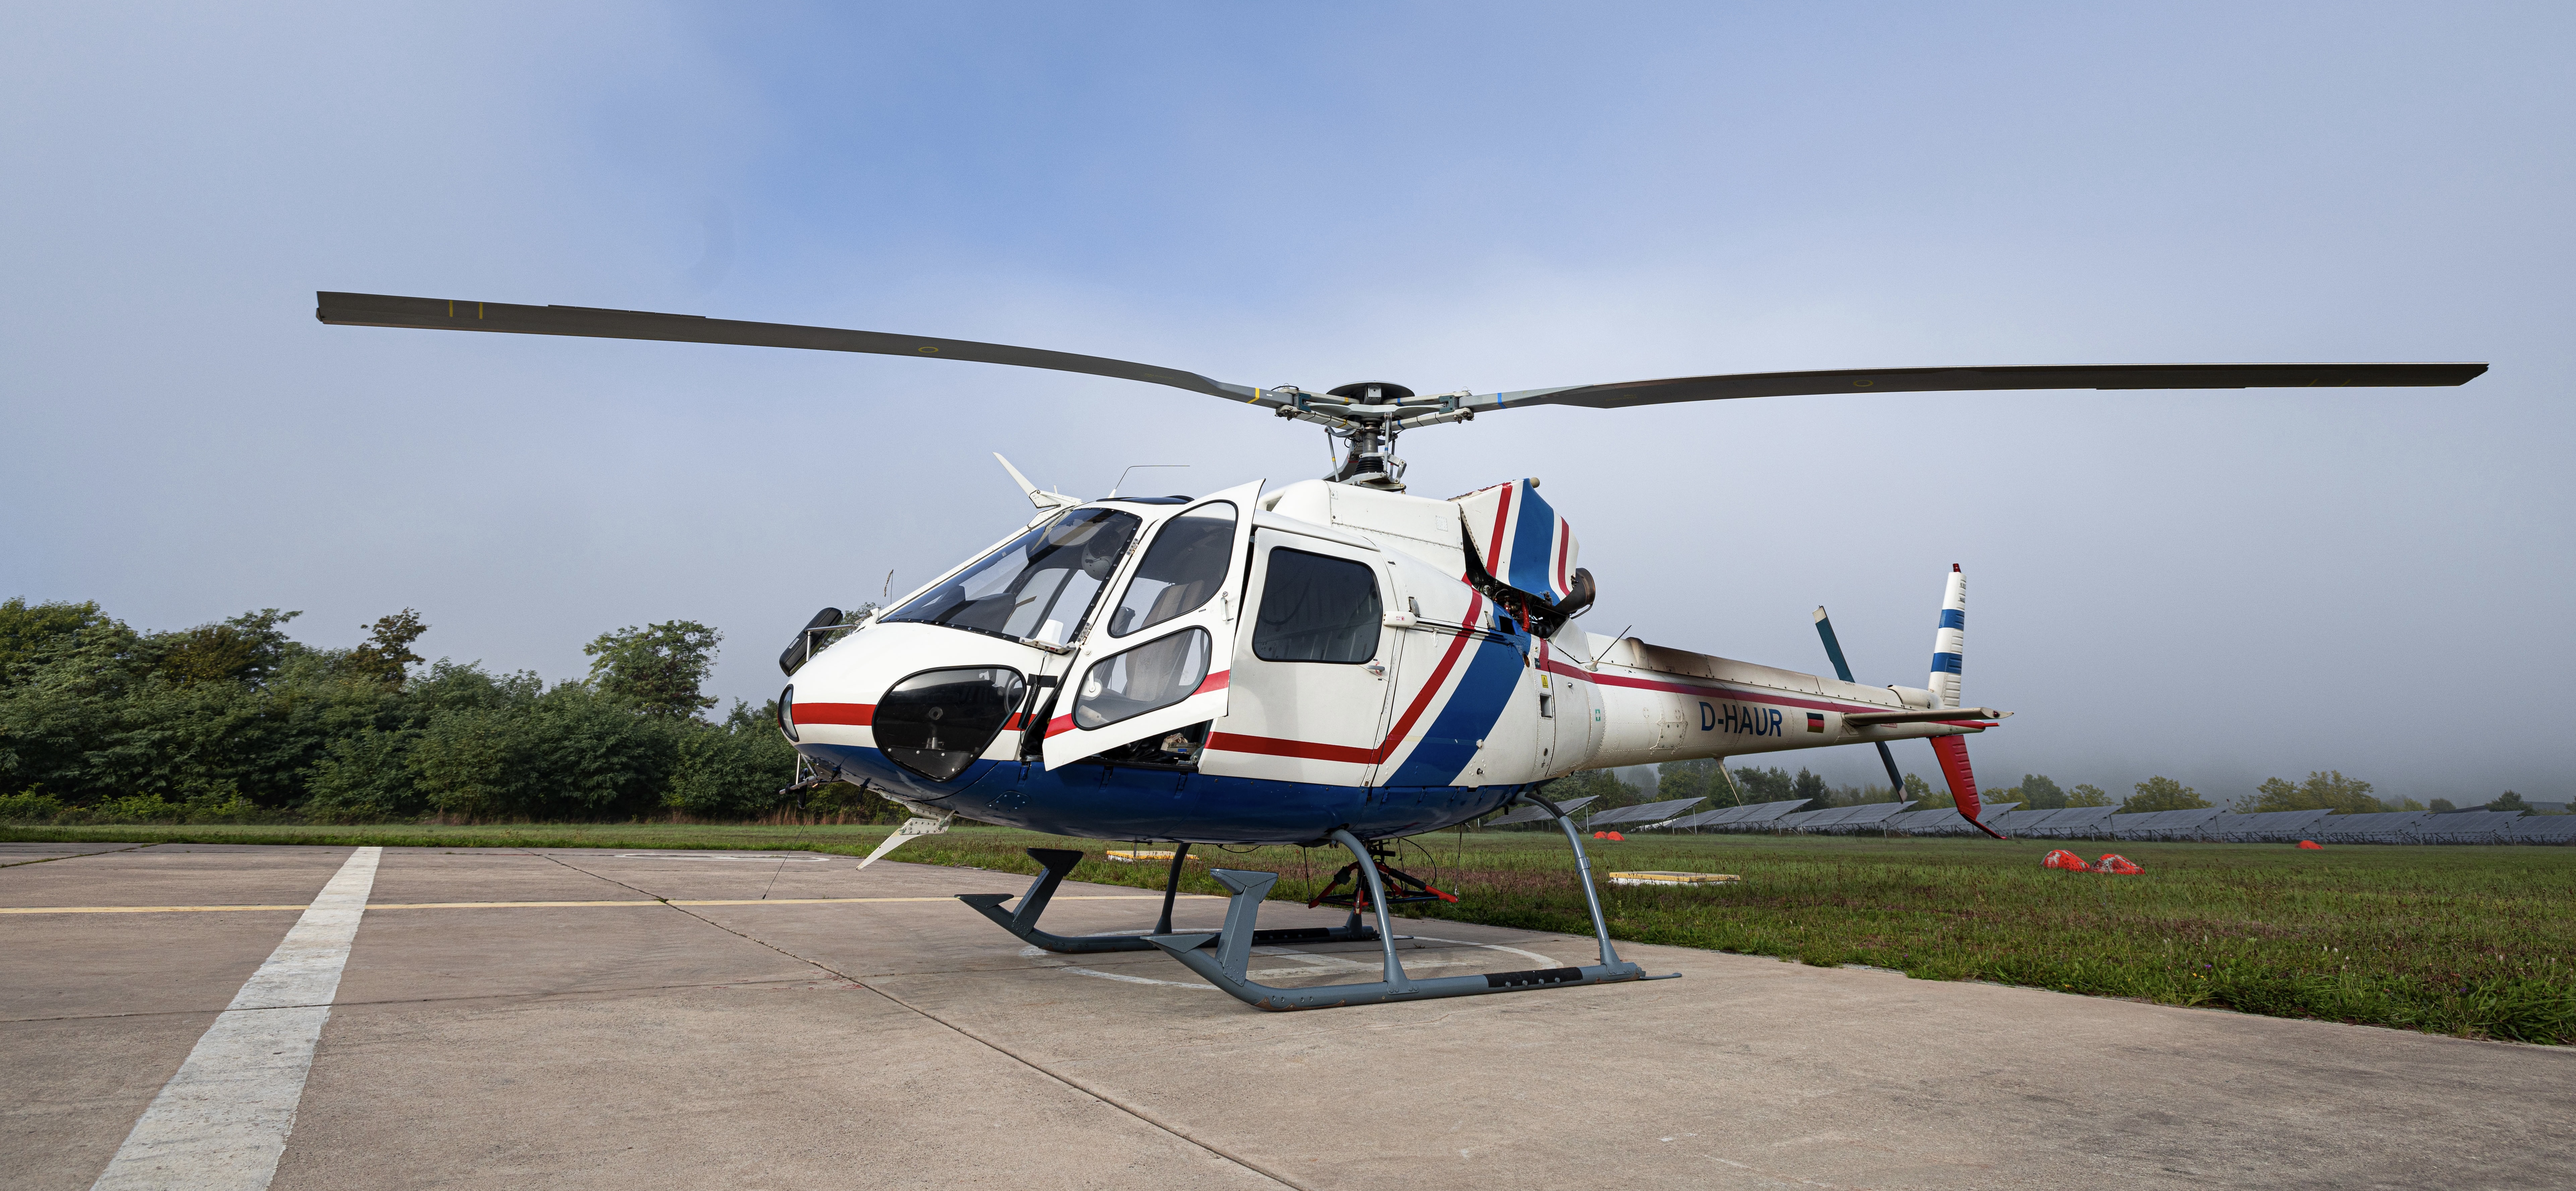 VRM delivers first H125 Level 3 VR simulator to Germany